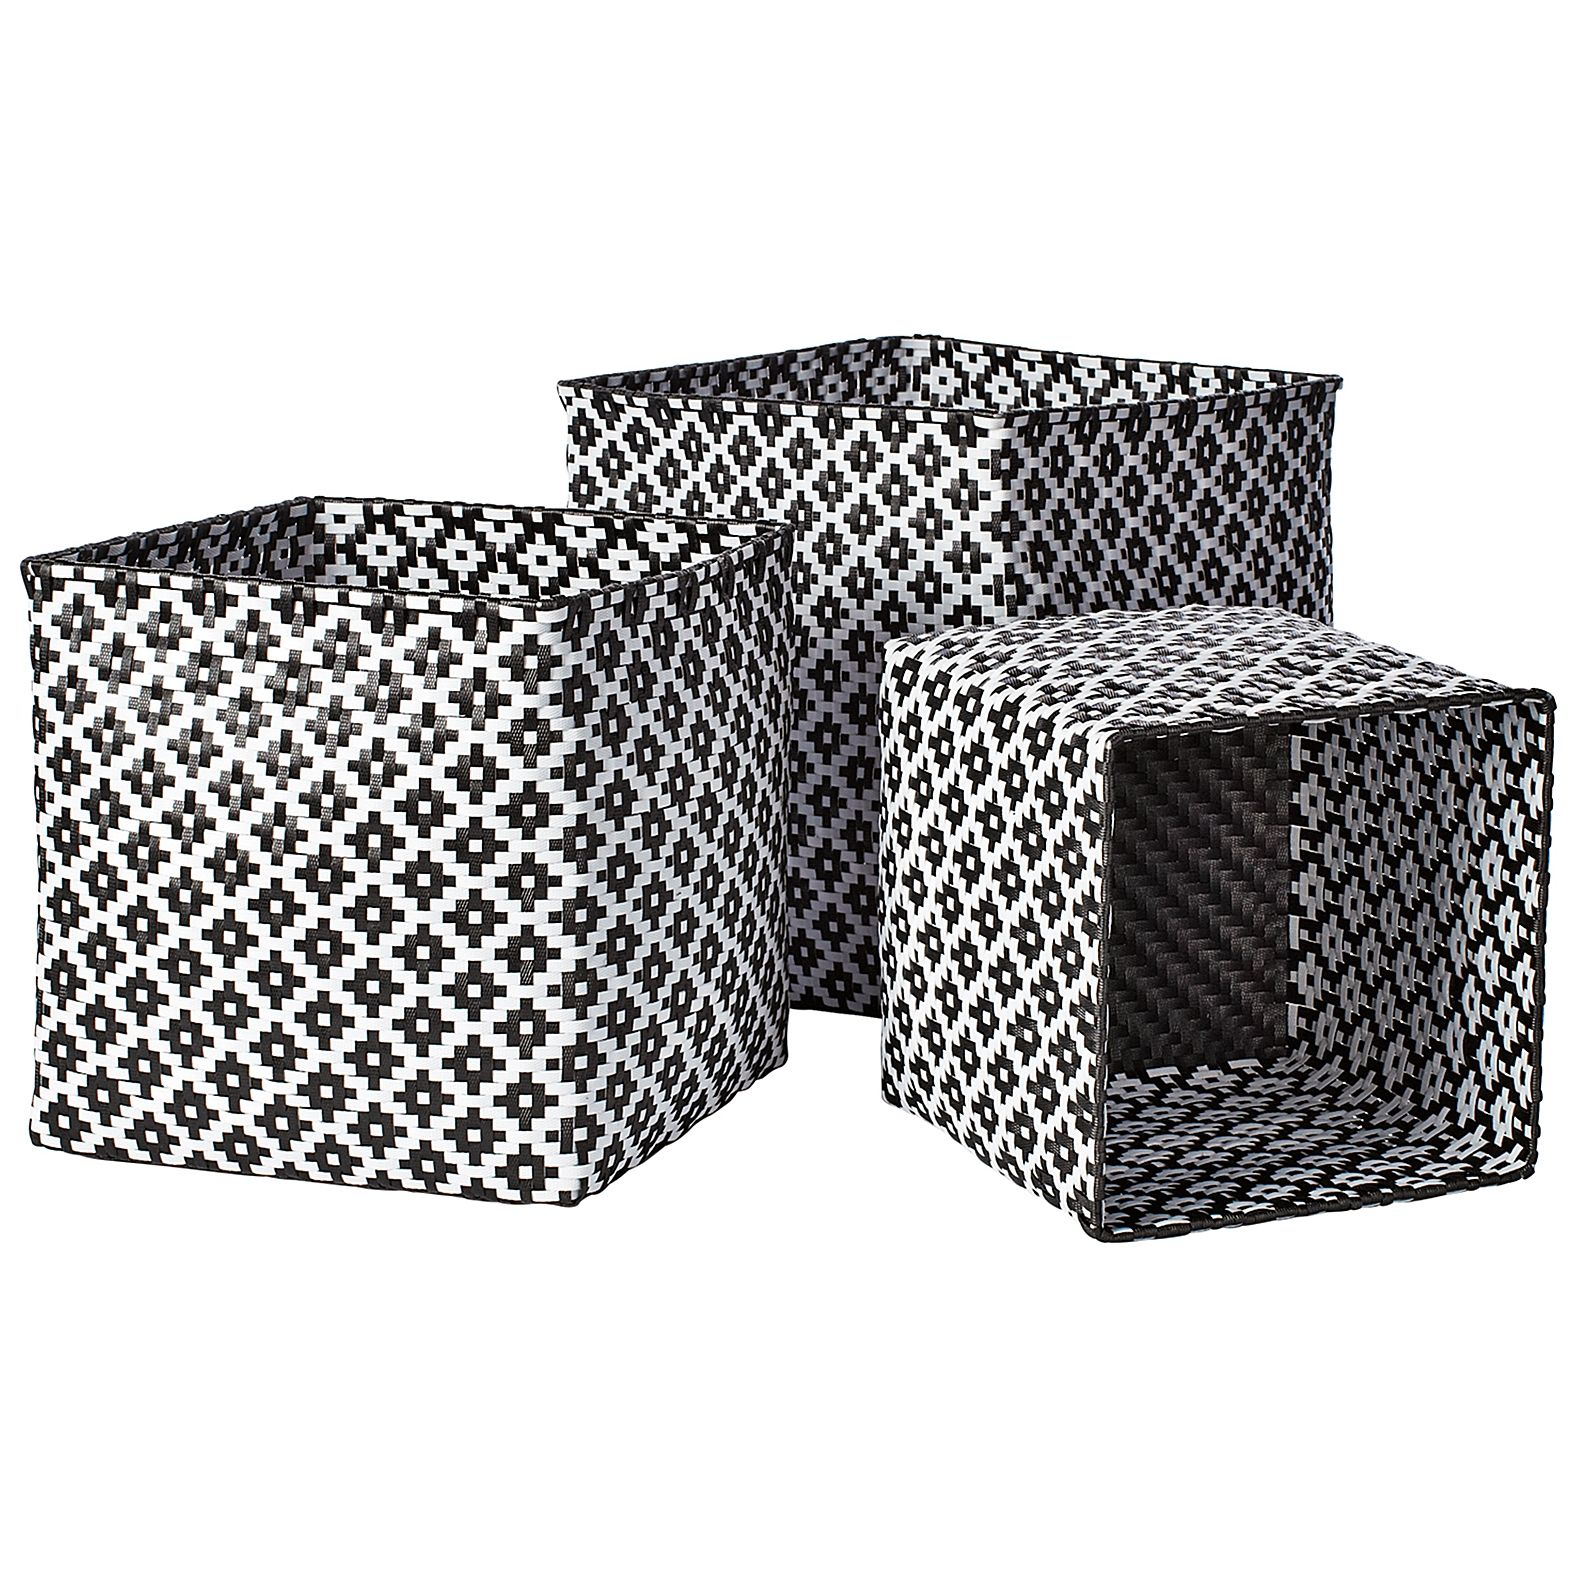 Black And White Storage Bins Spaces And Gems Bedroom Storage inside size 1575 X 1575